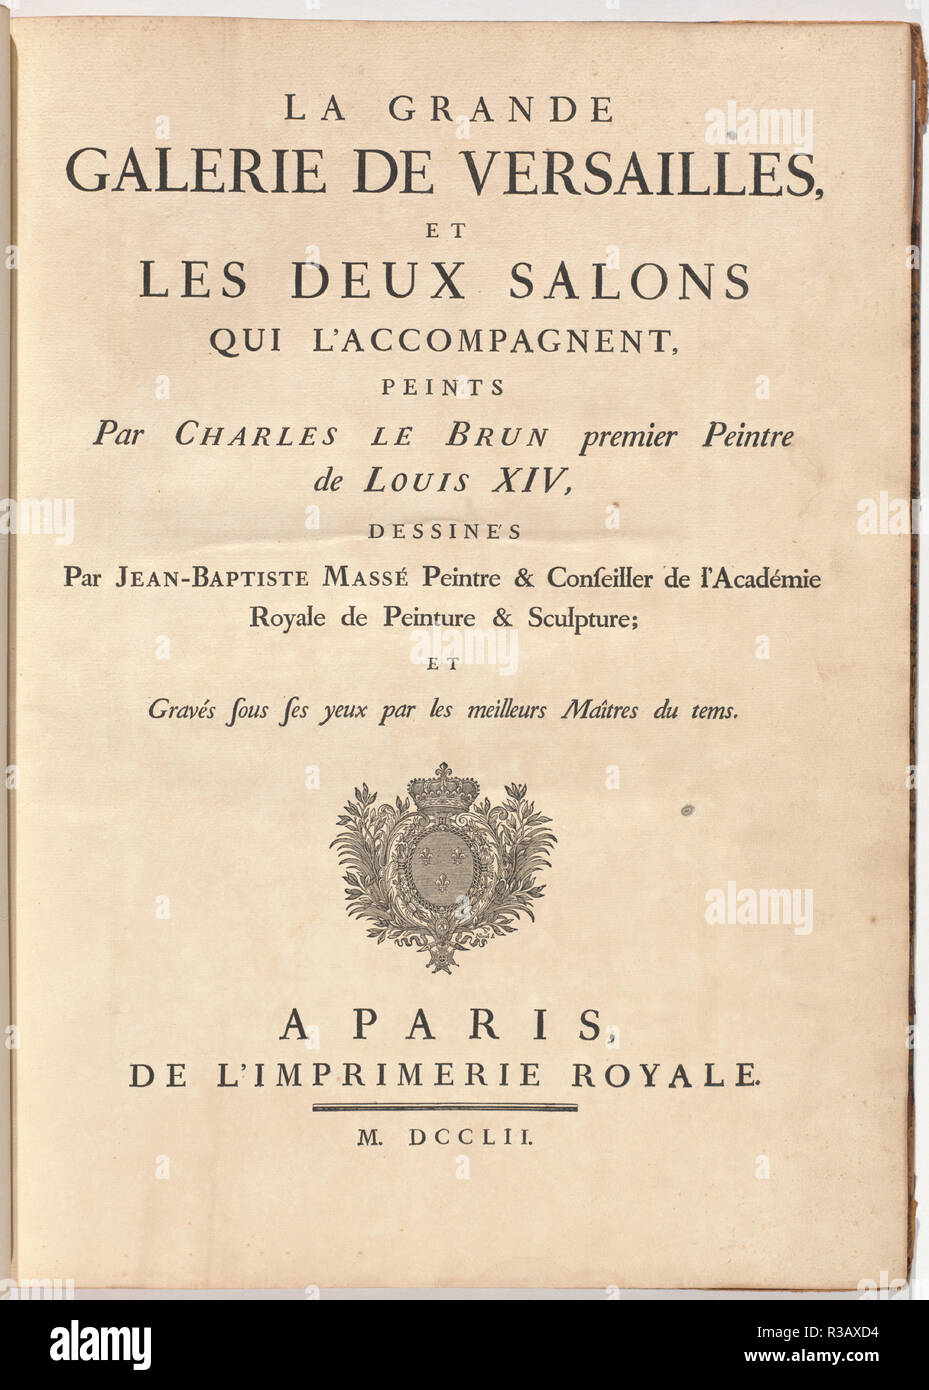 La Grande Galerie de Versailles, et les deux salons qui l'accompagnent (The Grand Gallery of Versailles and Two Accompanying Salons). Dated: 1752. Dimensions: book: 65.5 × 49 × 5.7 cm (25 13/16 × 19 5/16 × 2 1/4 in.). Medium: bound volume with 56 engravings including 1 engraved portrait of Massé and 23 double-spread plates. Museum: National Gallery of Art, Washington DC. Author: Jean-Baptiste Massé (designer and author) and various engravers after Charles Le Brun, with an engraved portrait of J-B Massé by Johann Georg Wille after Louis Tocqué. Stock Photo